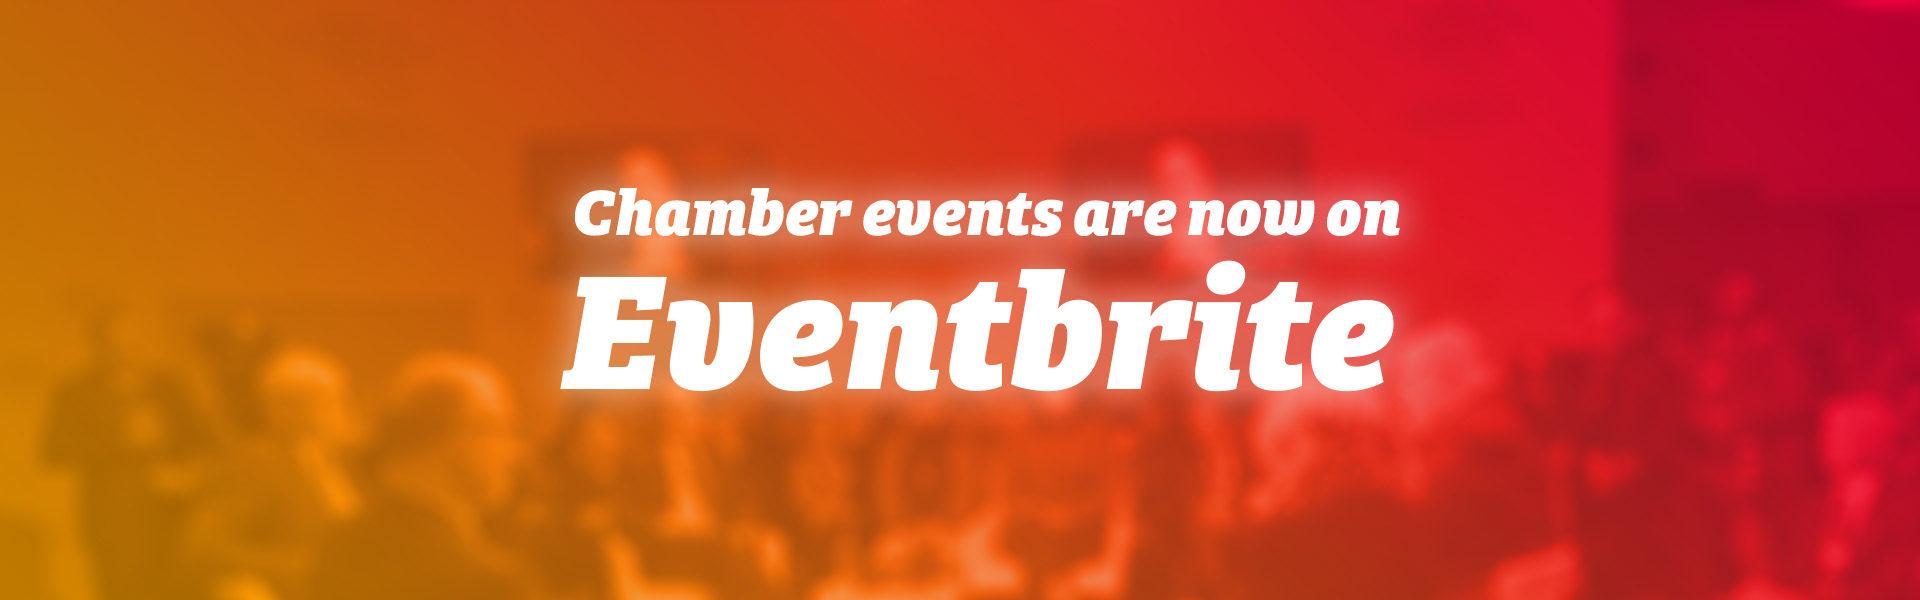 Chamber events are now on Eventbrite